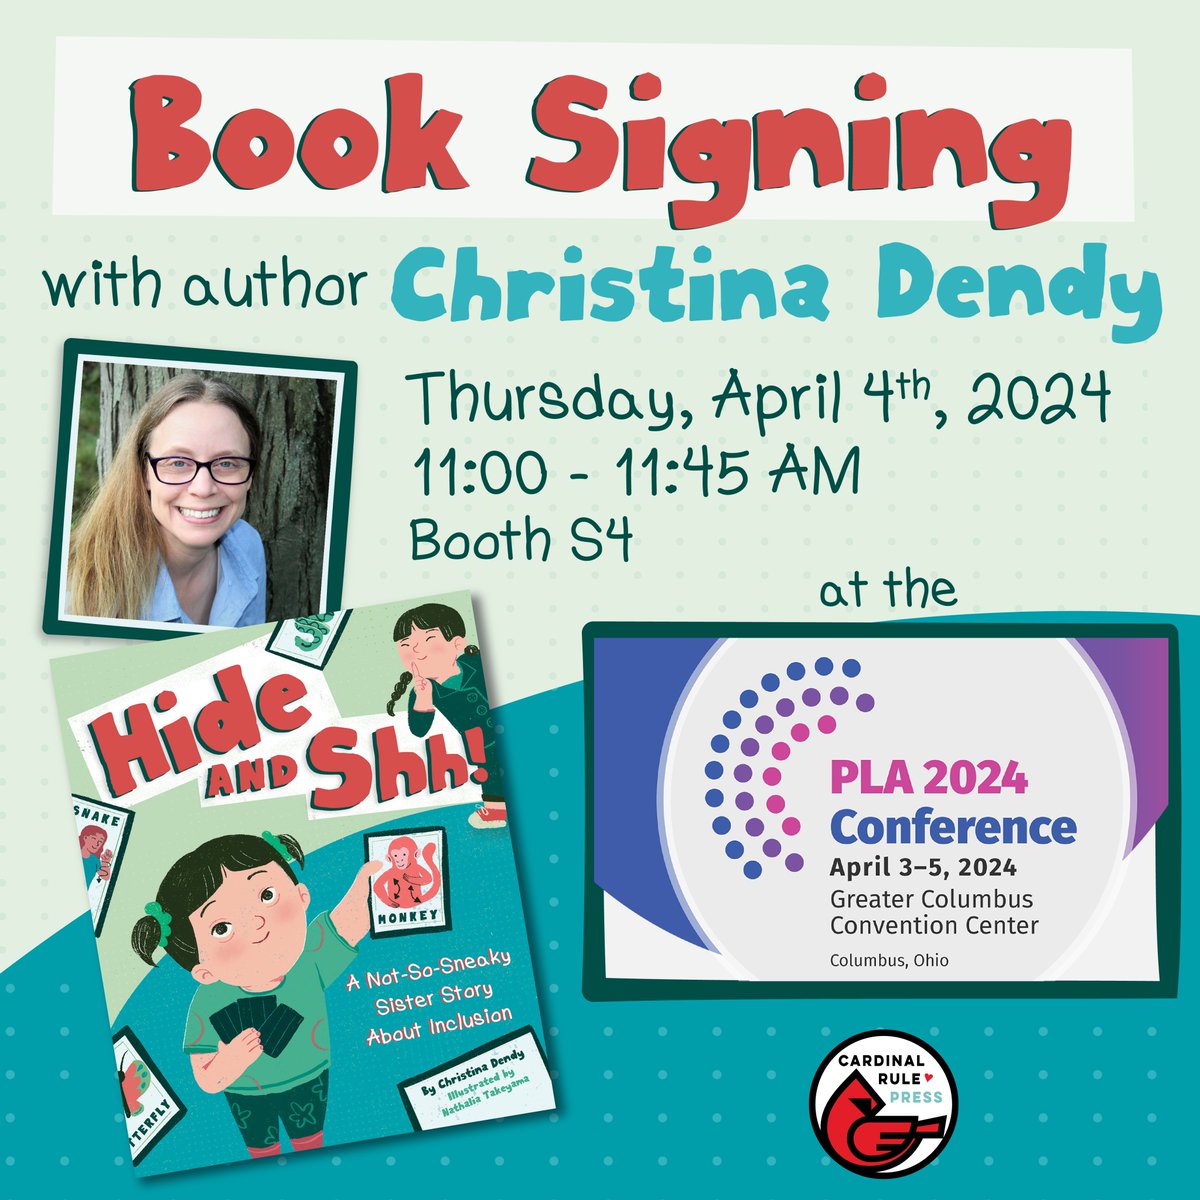 Excited to attend the @ALA_PLA conference in Columbus this Thursday! Come see me! #PLA2024